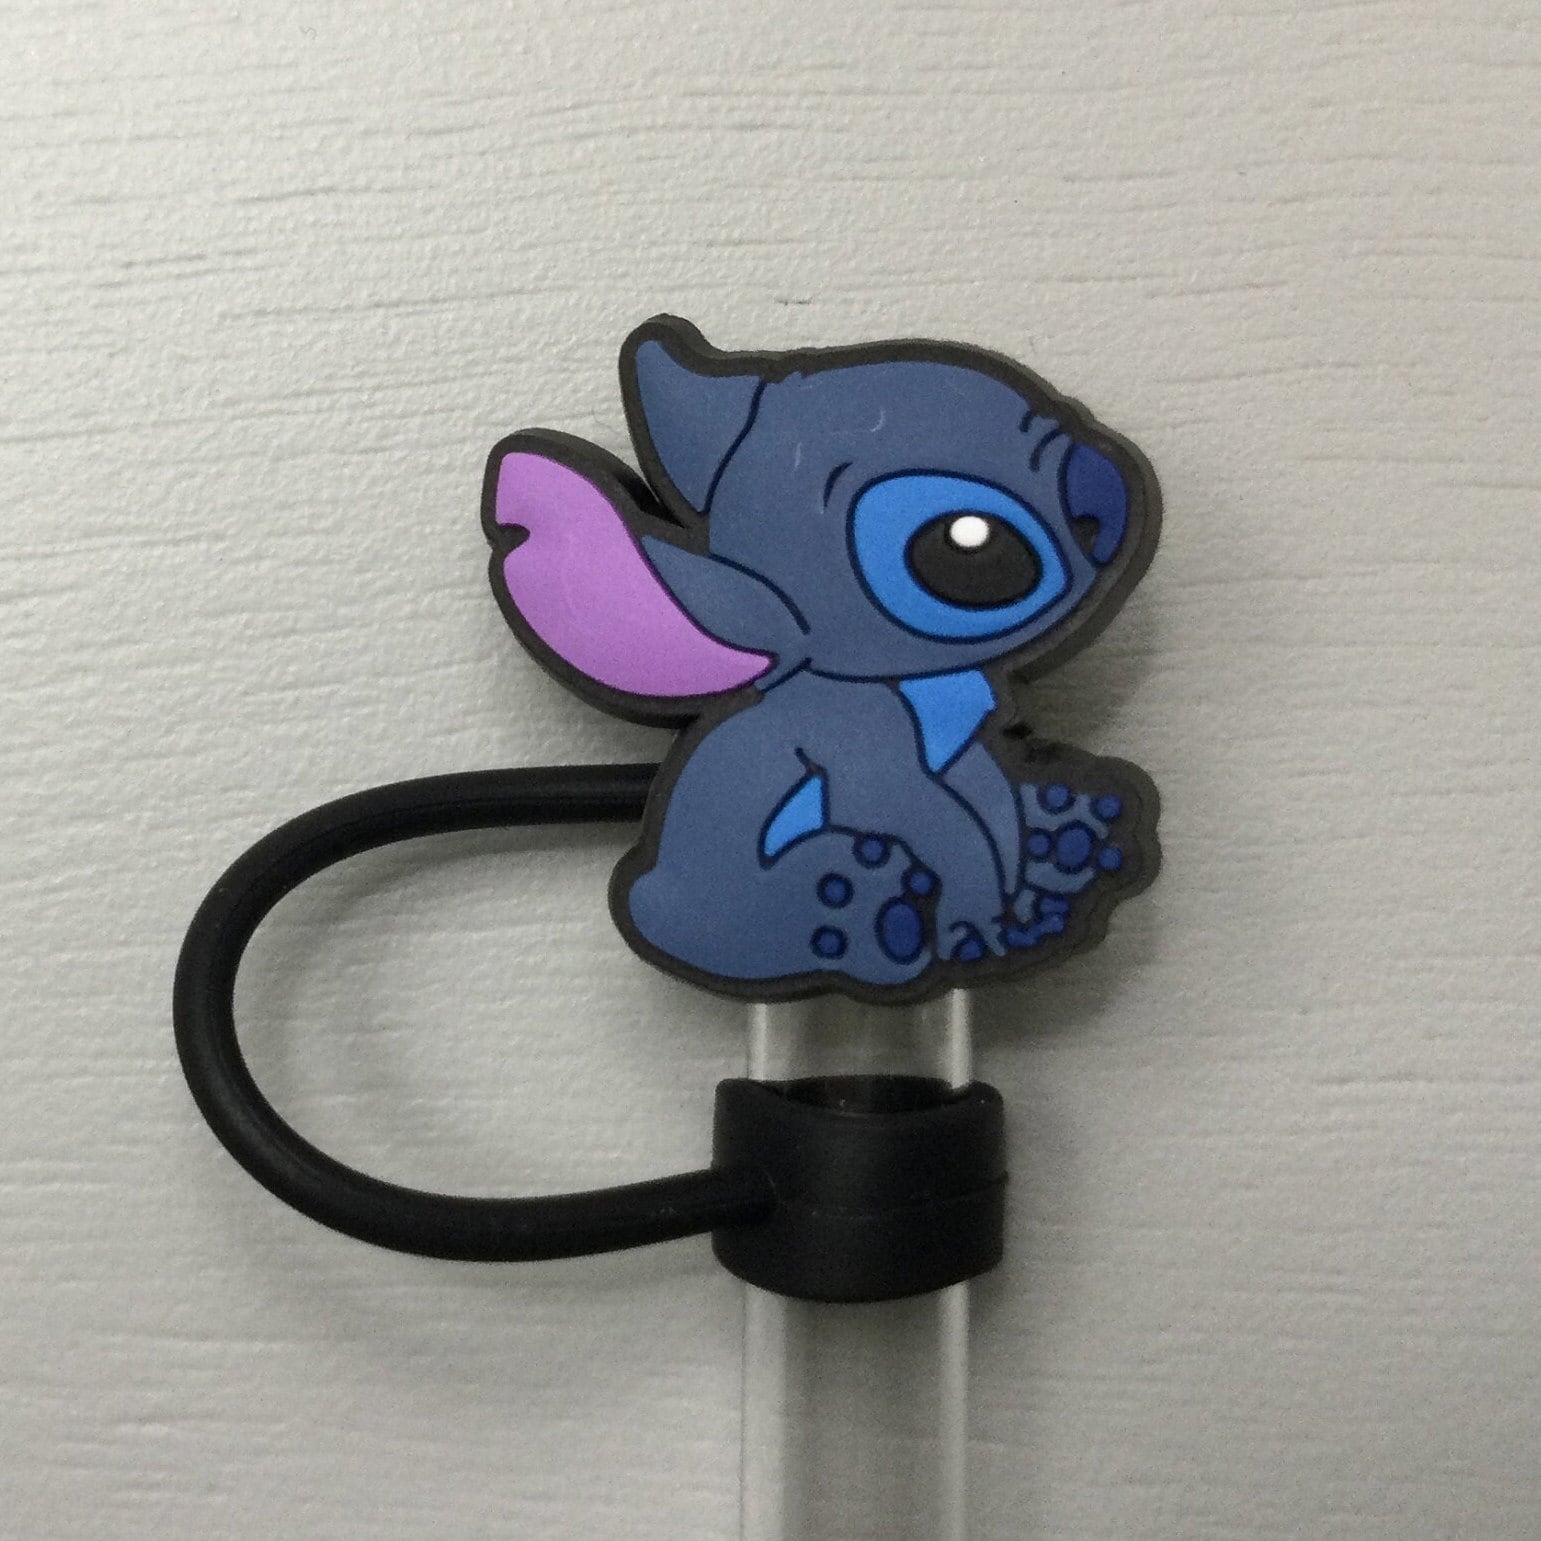 Stitch Straw Pencil Toppers Made for Stanley Starbucks Tumbler Cups  Silicone Dust Charms Plug Lids With FREE Metal Reusable Straws & Brushes 